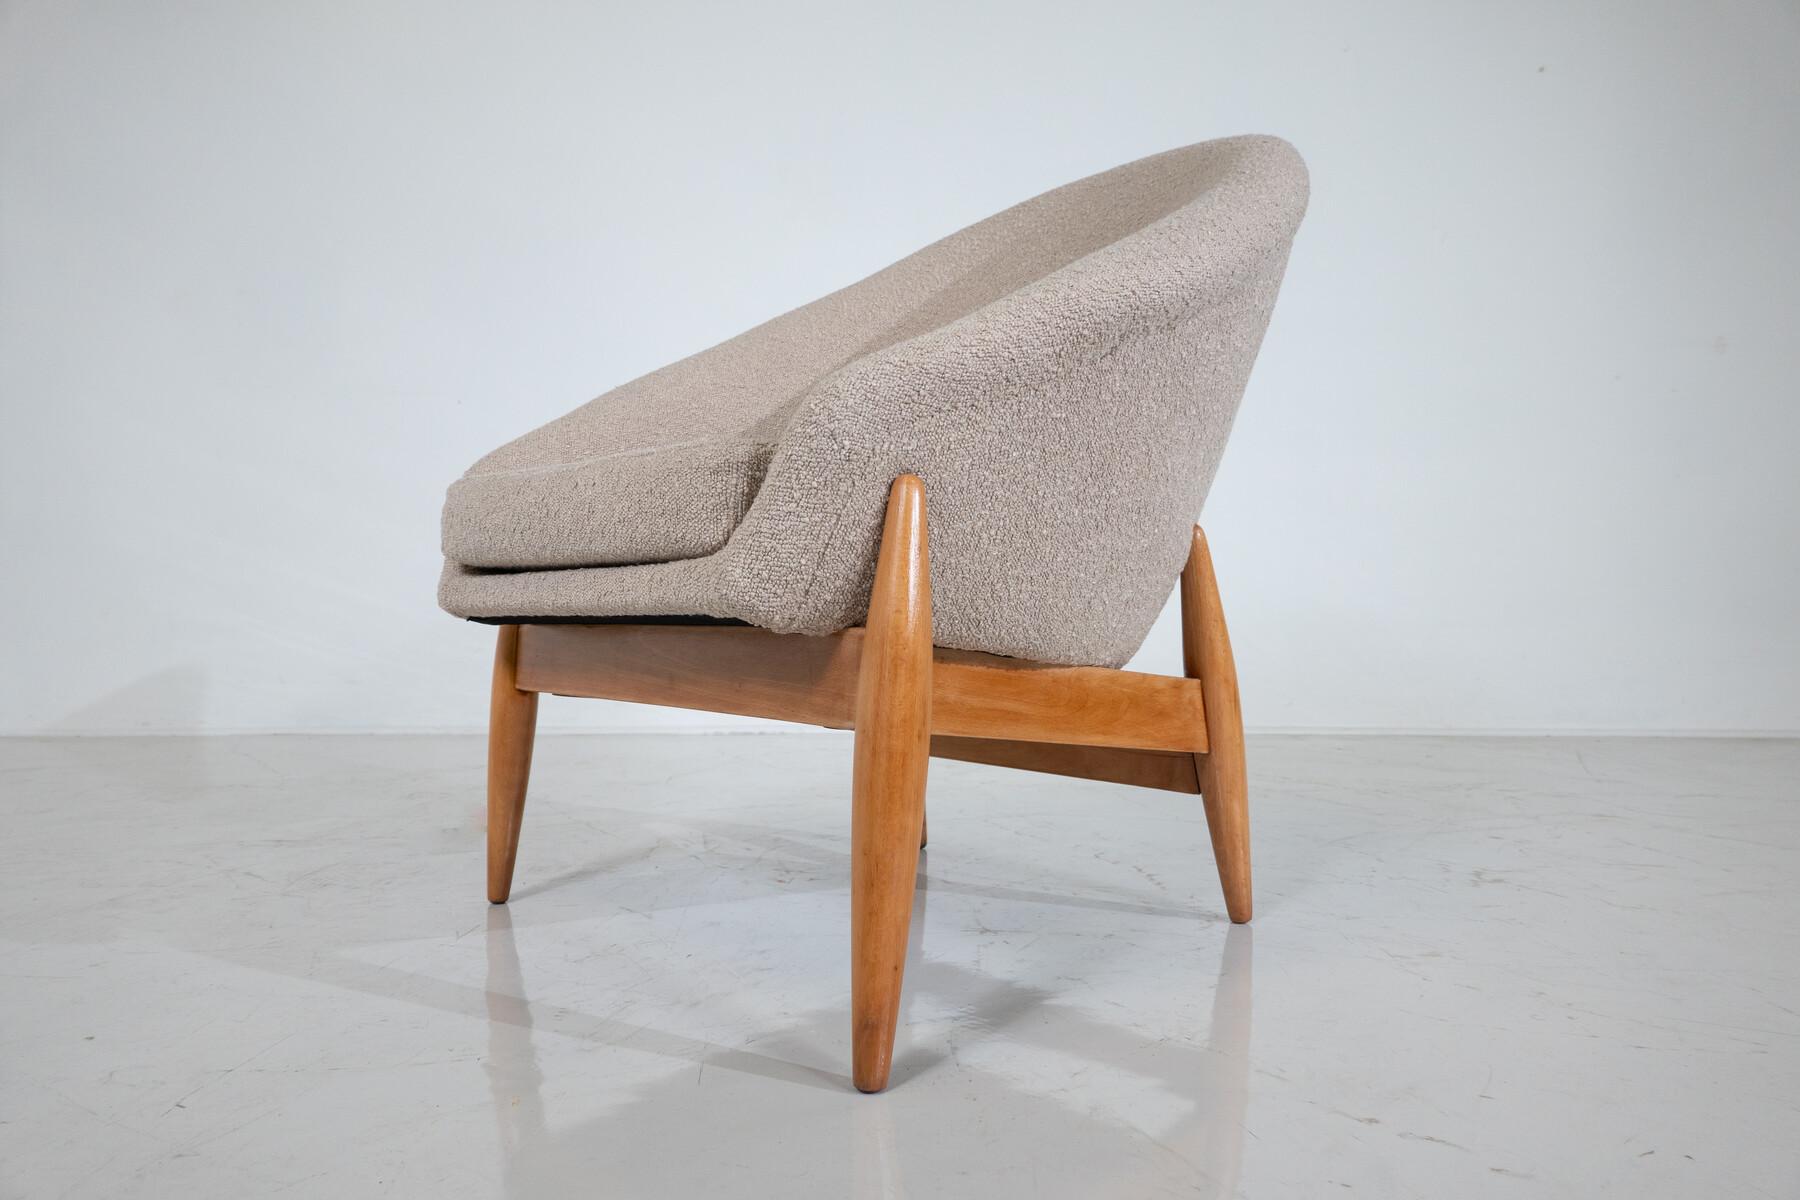 Mid-20th Century Pair of Mid-Century Modern Beige Fabric Armchairs by Julia Gaubek - Hungary 1950 For Sale